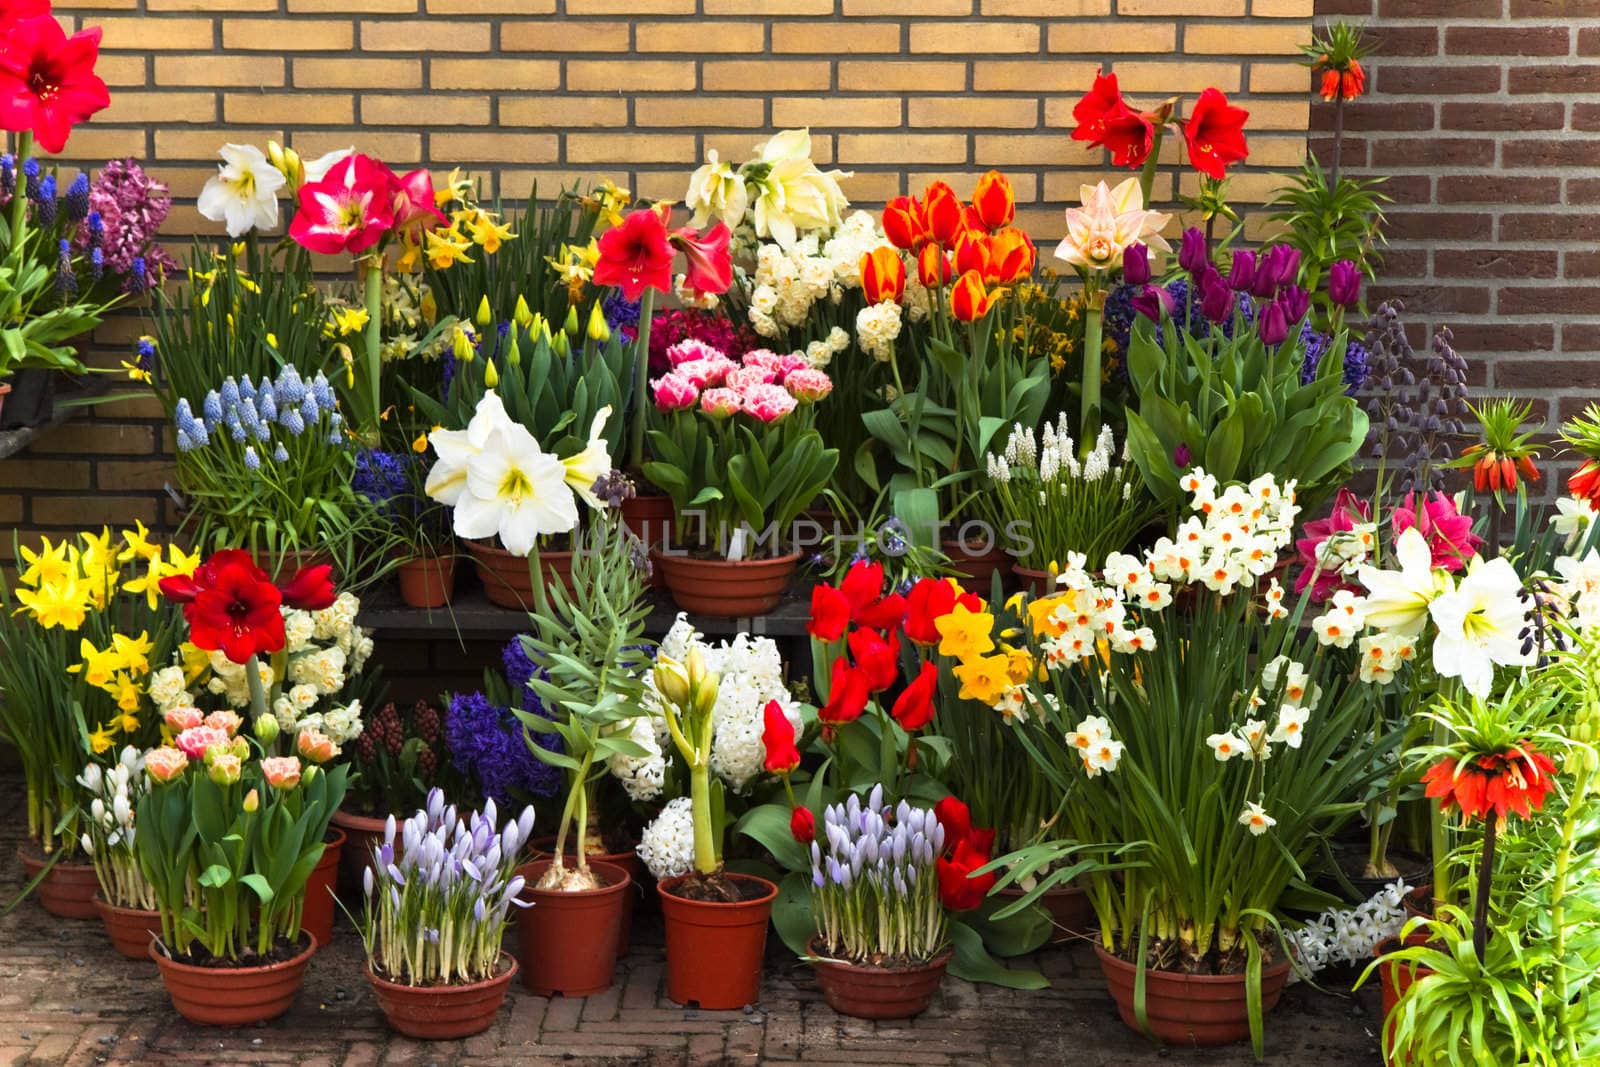 Wall with collection of colorful spring flowers in pots and containers